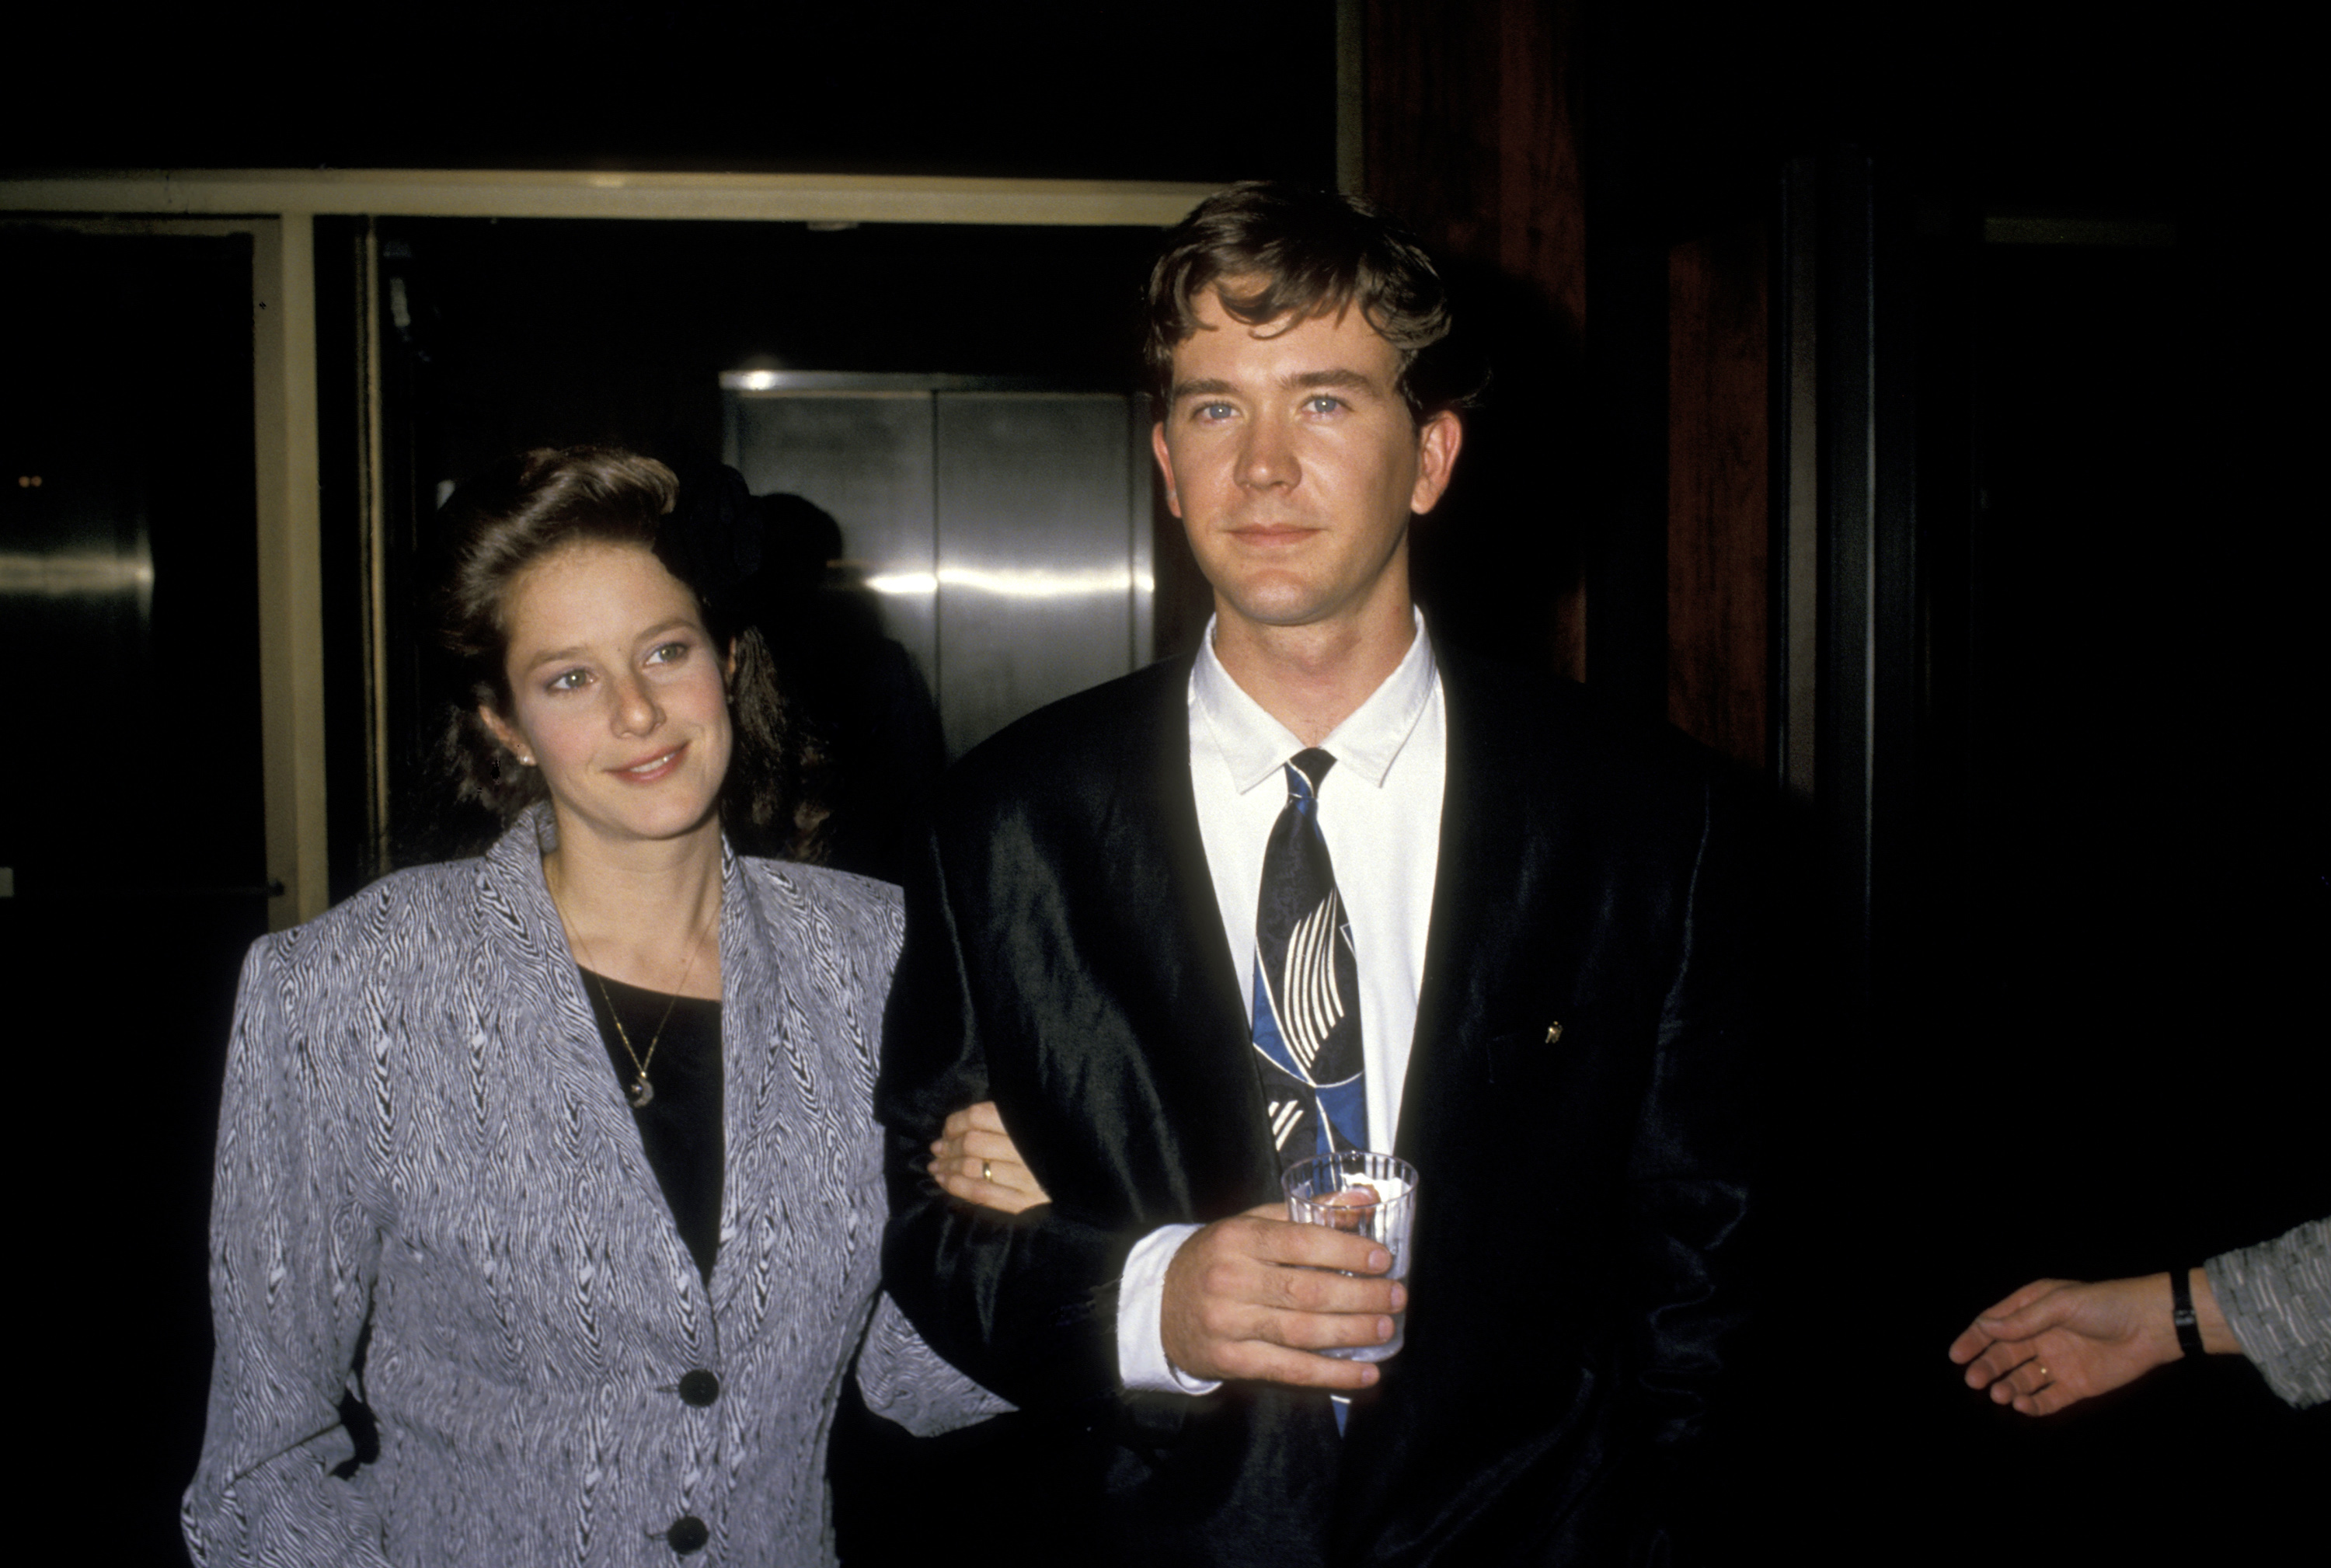 Debra Winger and Timothy Hutton during 1987 Student Film Awards on June 6, 1987, in Beverly Hills, California. | Source: Getty Images